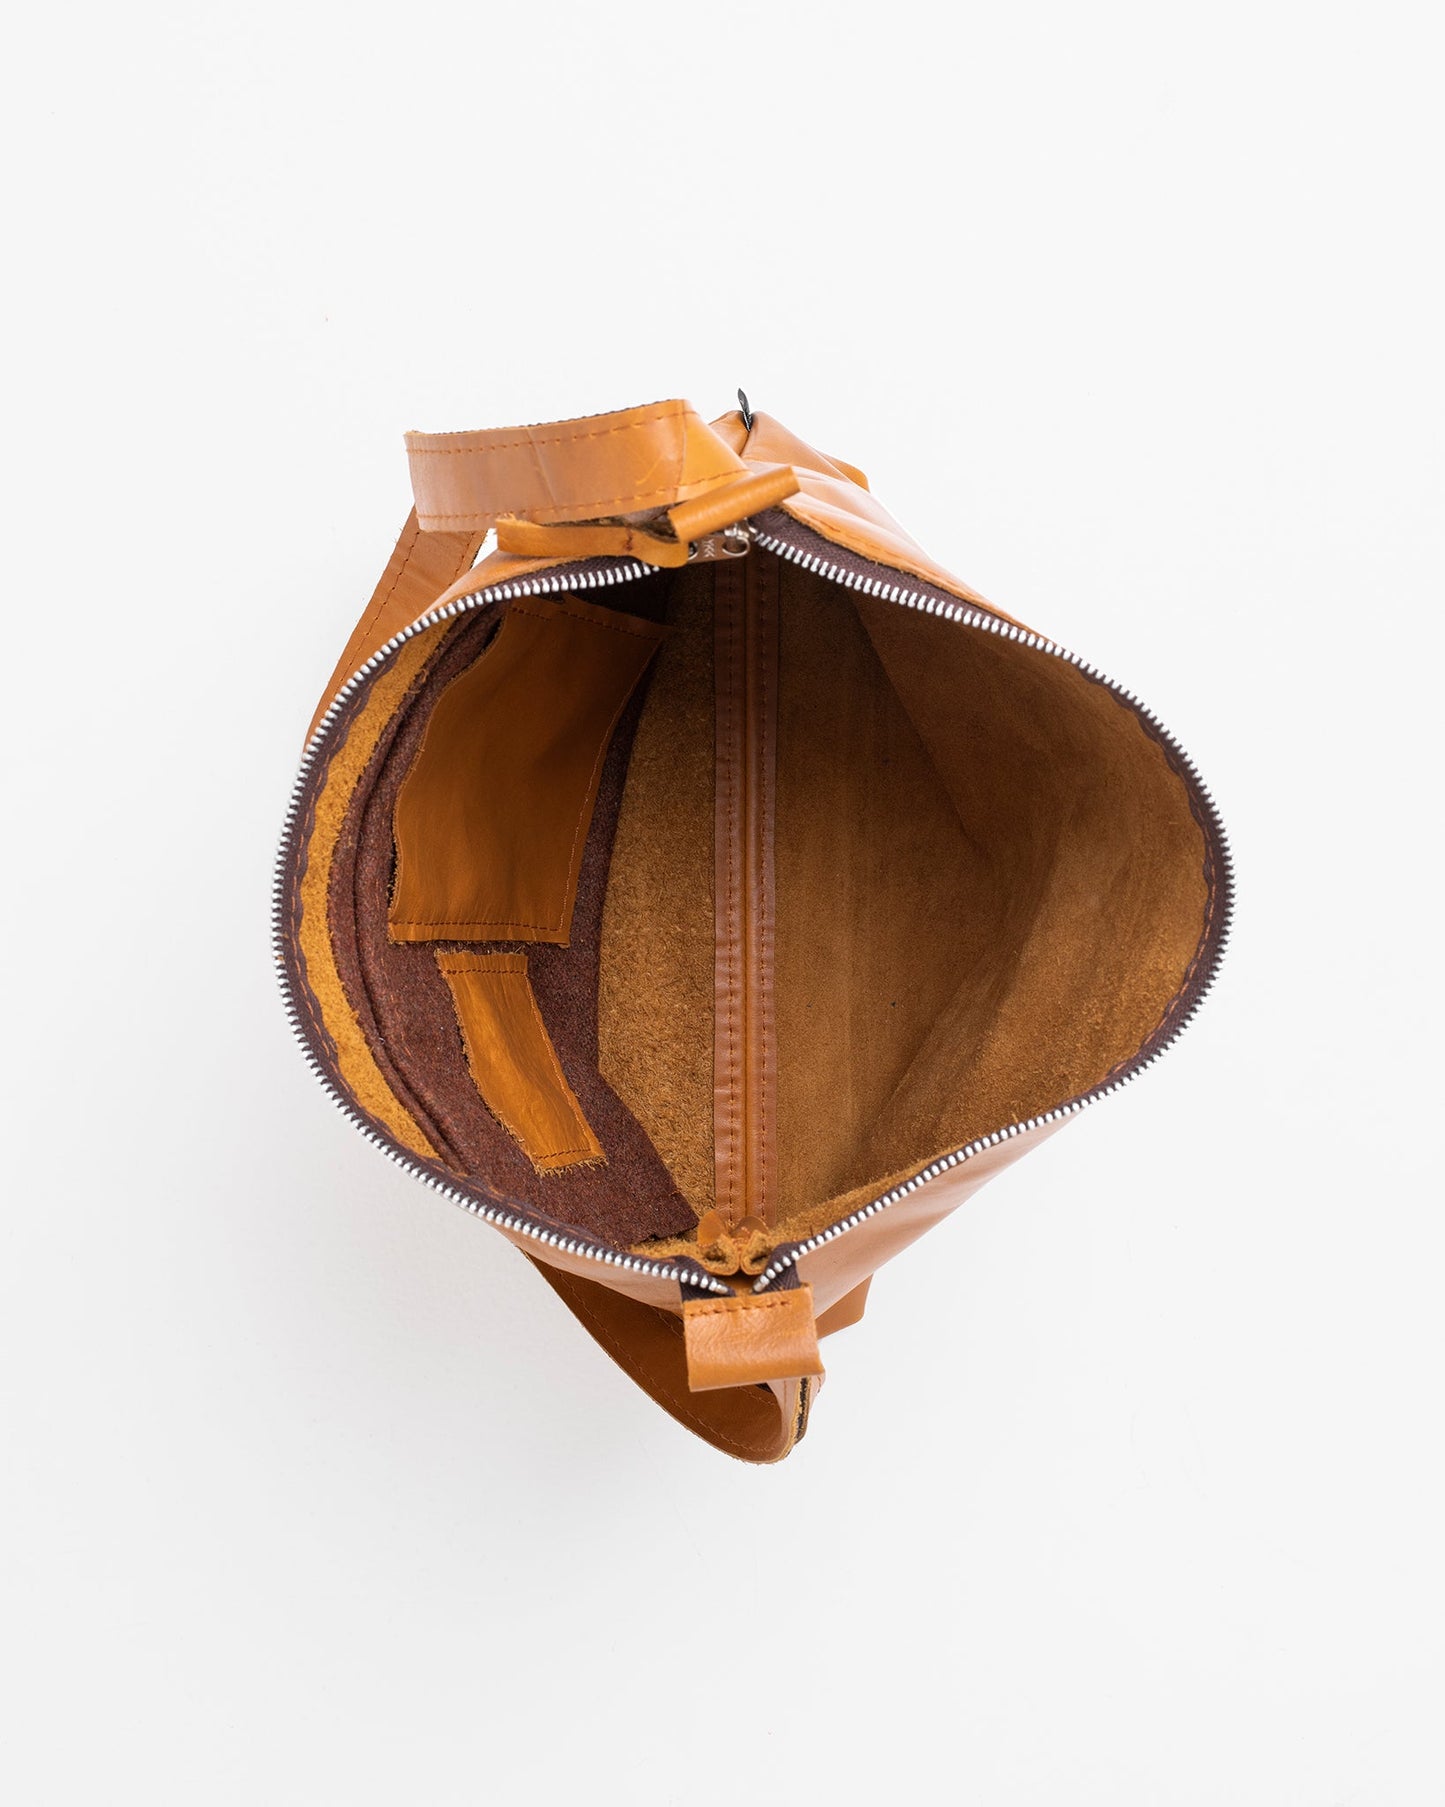 Handmade caramel leather shoulder bag, Anet L, crafted from high-quality furniture leftovers, each unique due to handmade process. Designed and made in Estonia.